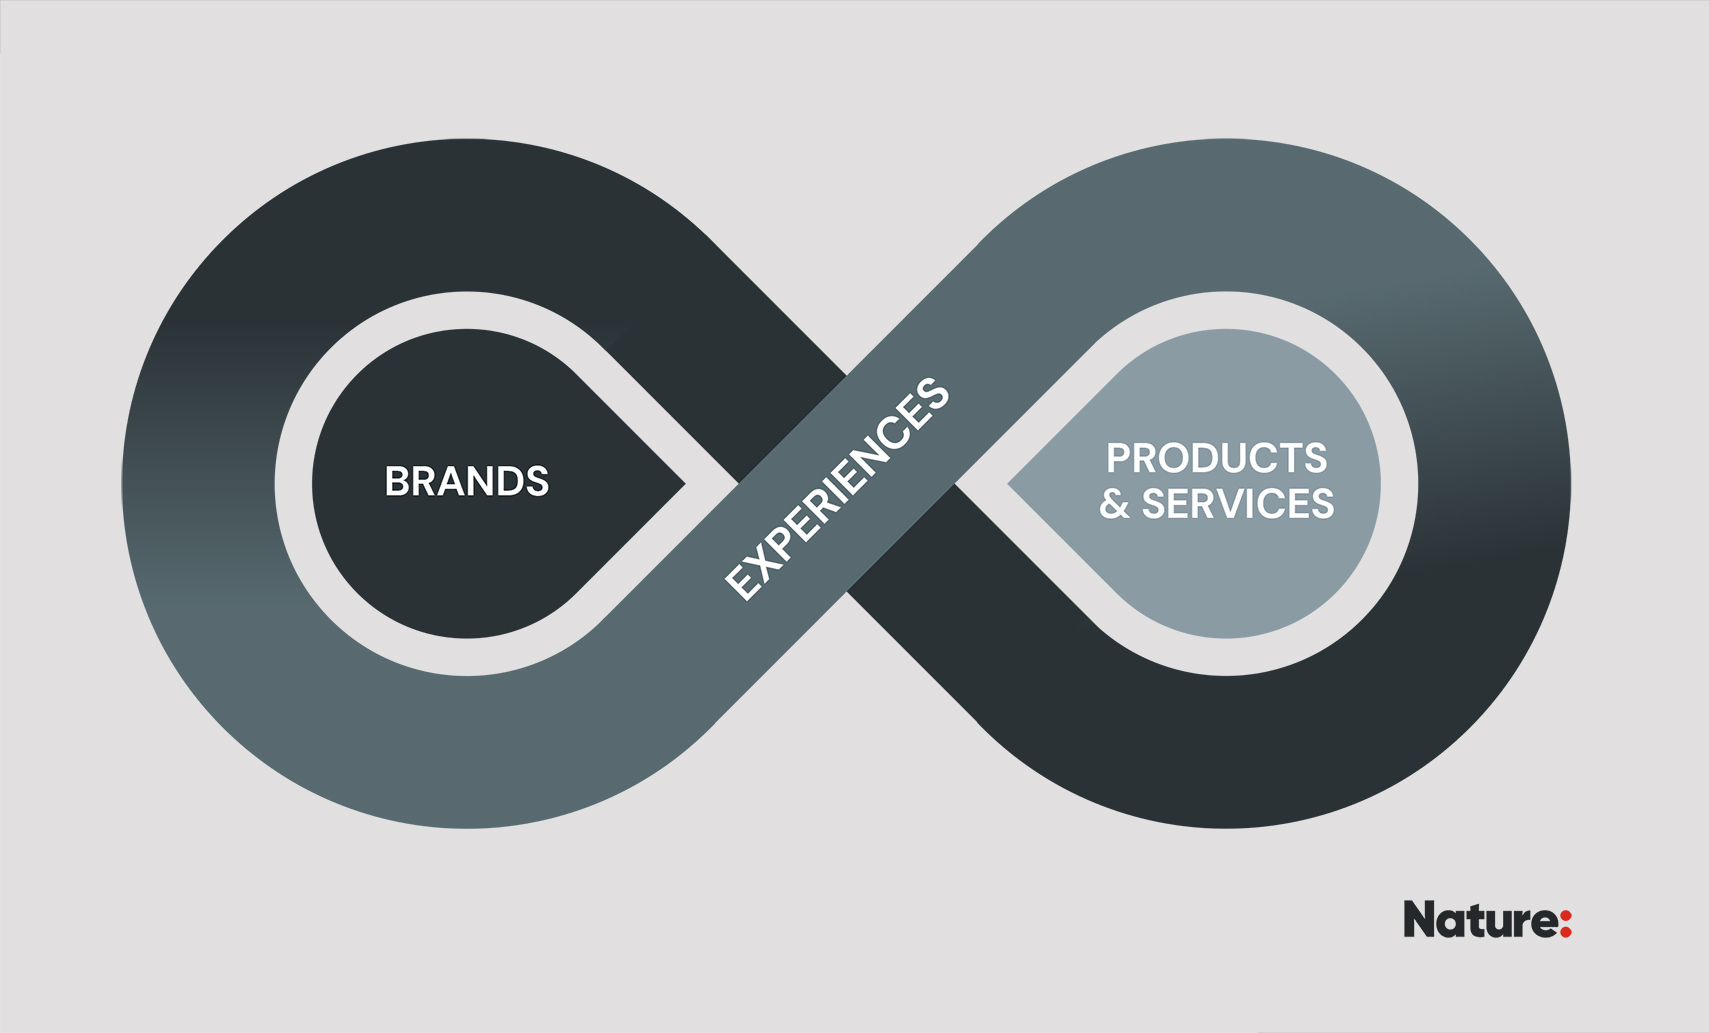 brand, product and experience - integrated approach